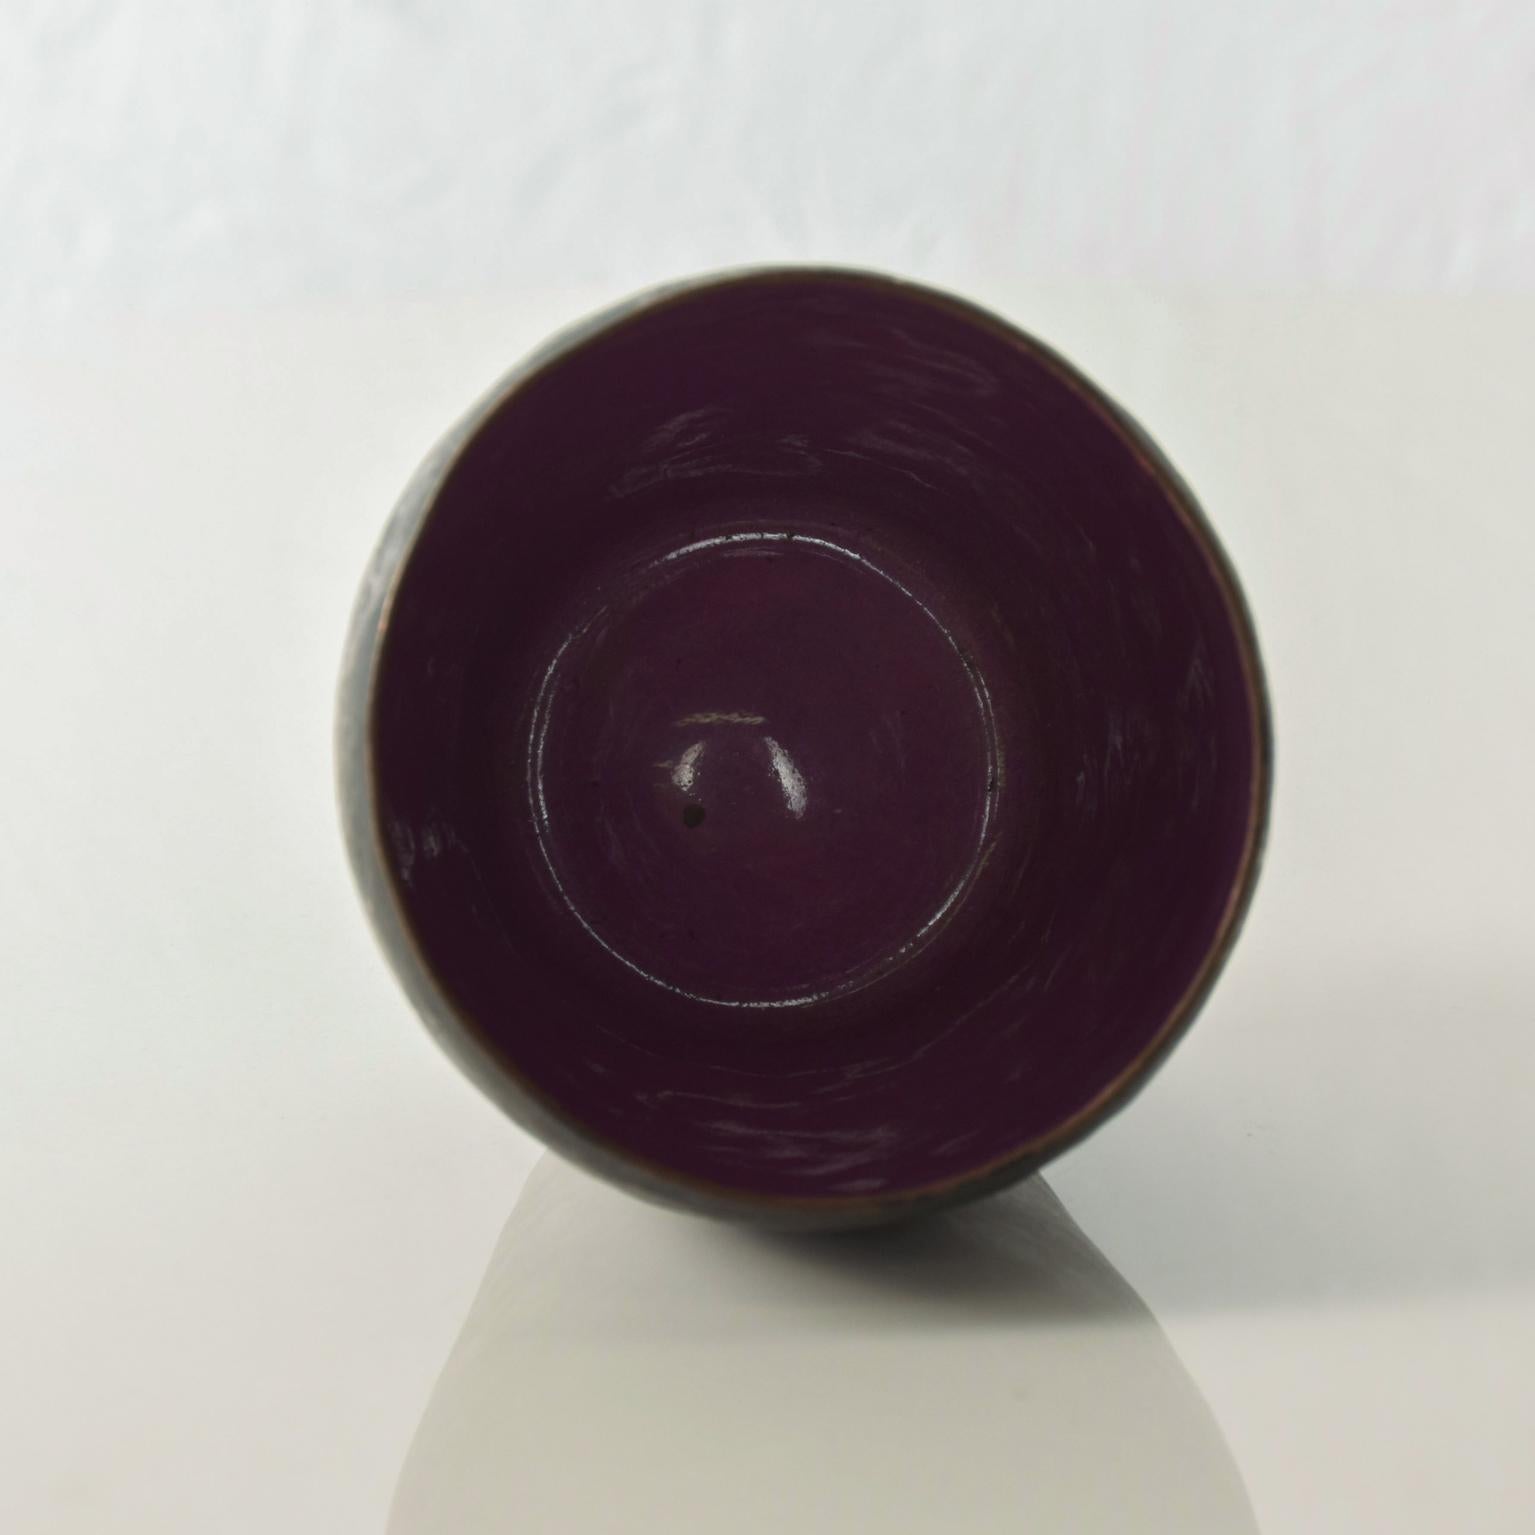 Mexican 1970s Petite Vase Hammered Copper with Purple Enamel by Raul Bellery